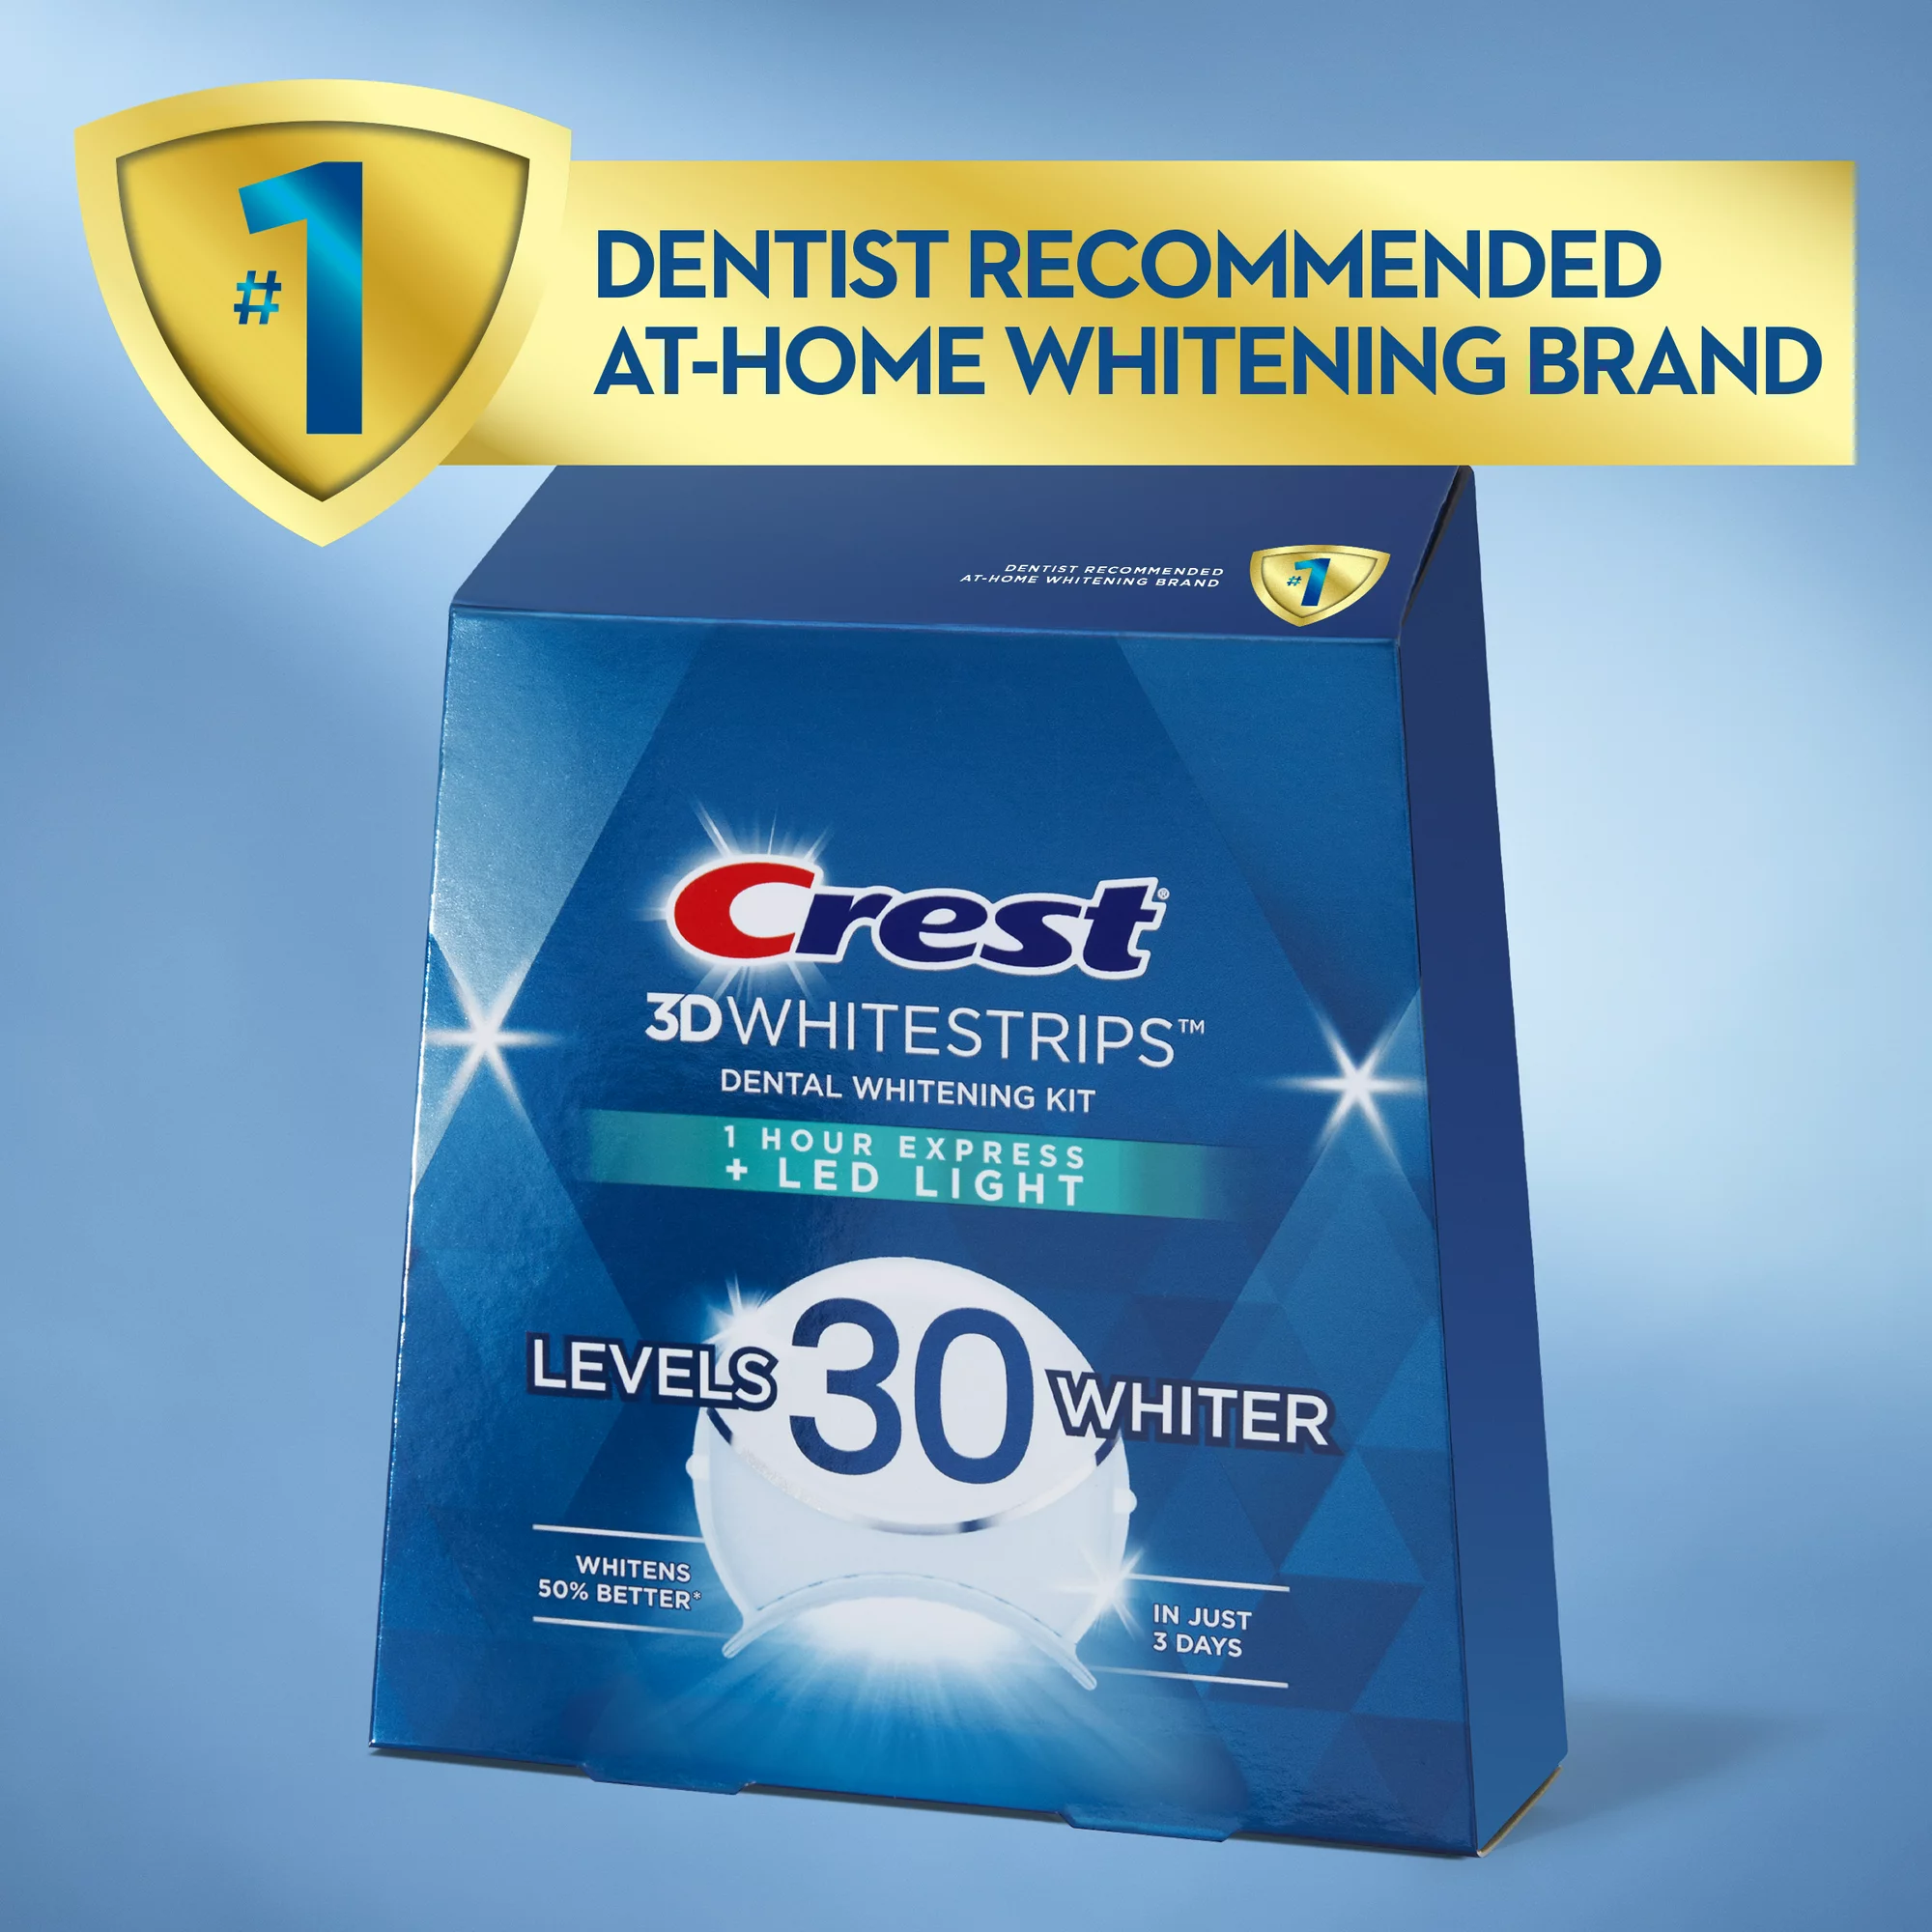 Crest 3D Whitestrips 1 Hour Express with LED Light – mq